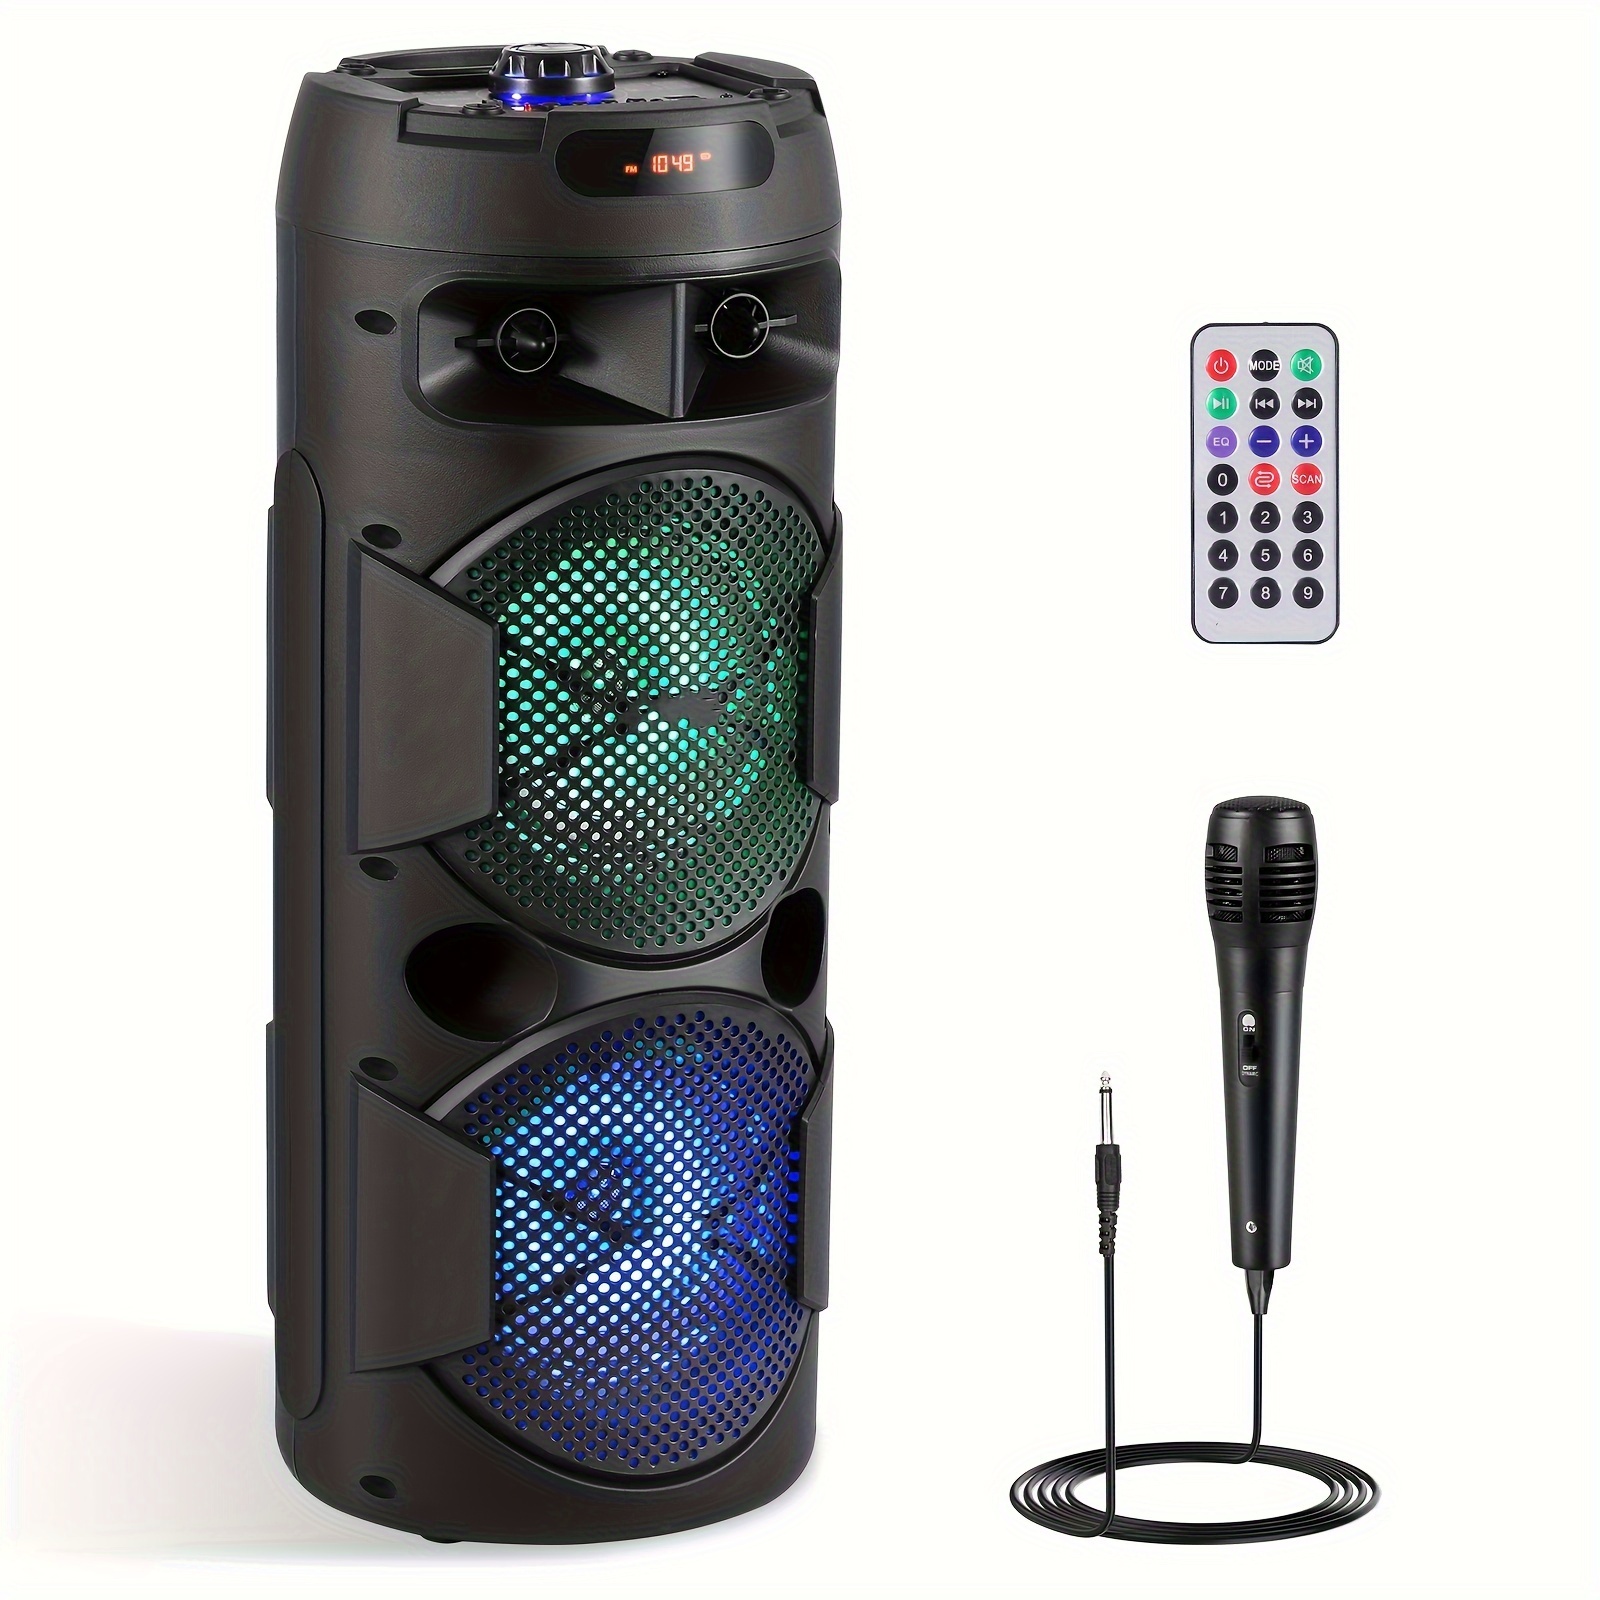 

Portable Bt Pa Speaker System, Rechargeable Outdoor Wireless Speaker Portable Pa System With Dual 6.5" Subwoofer Wired Microphone, Party Lights, Remote Control, Support Usb Fm Aux Audio Input